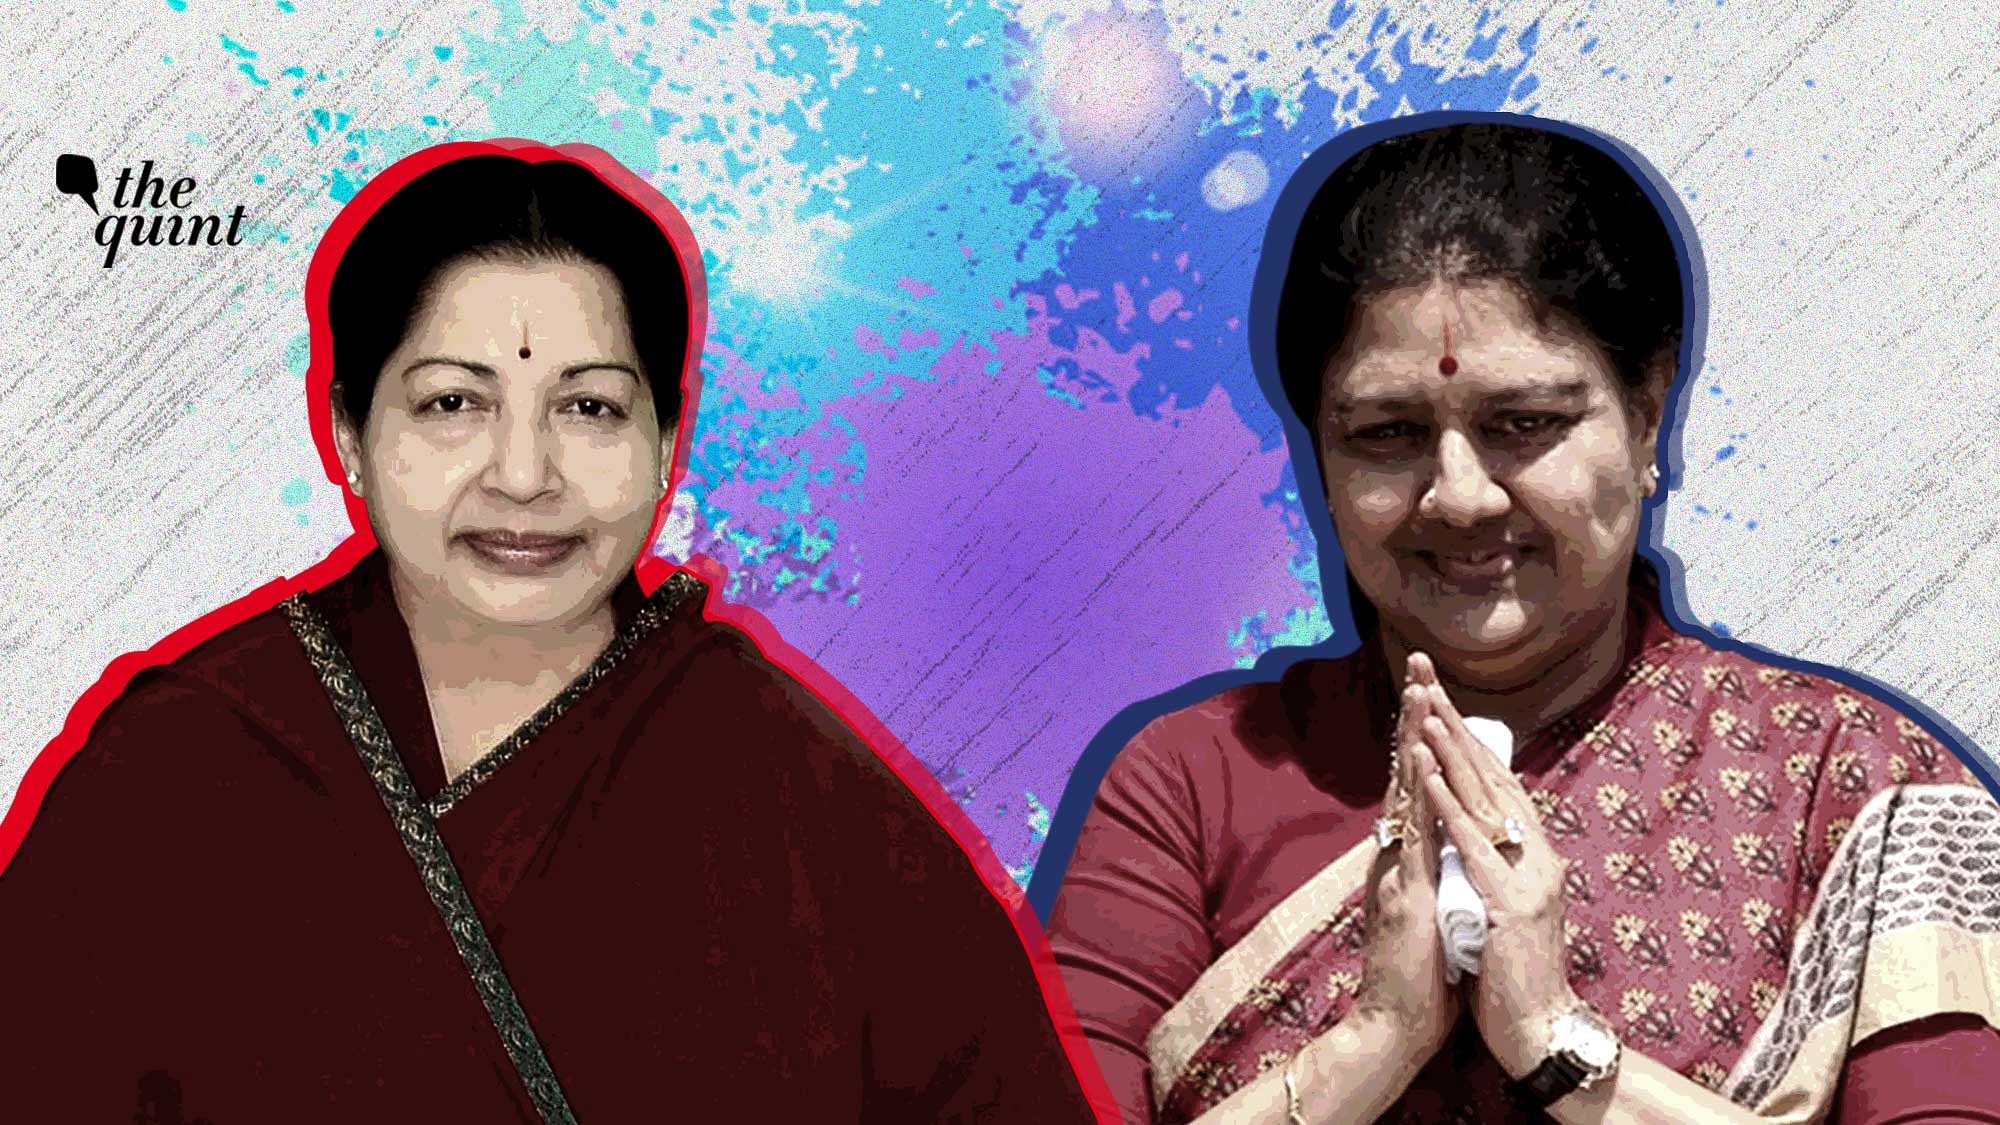 Late Chief Minister Jayalalithaa’s closest aide Sasikala announced that she has decided to “step aside” from politics.